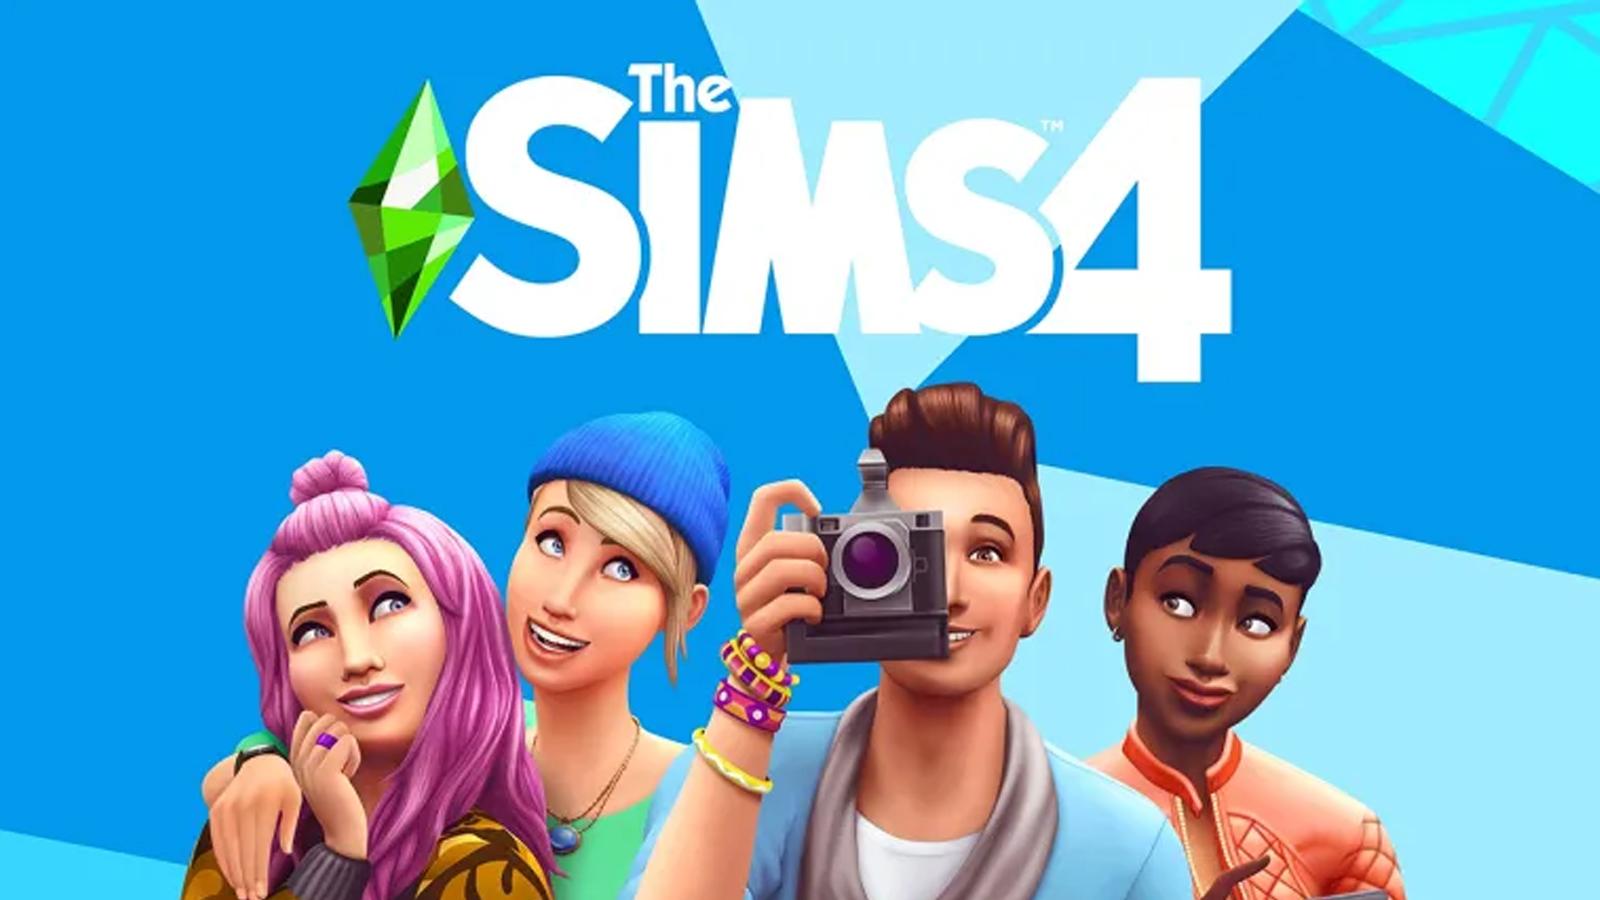 Starting July 11th, The Sims 4 Will Be FREE with an Origin Access